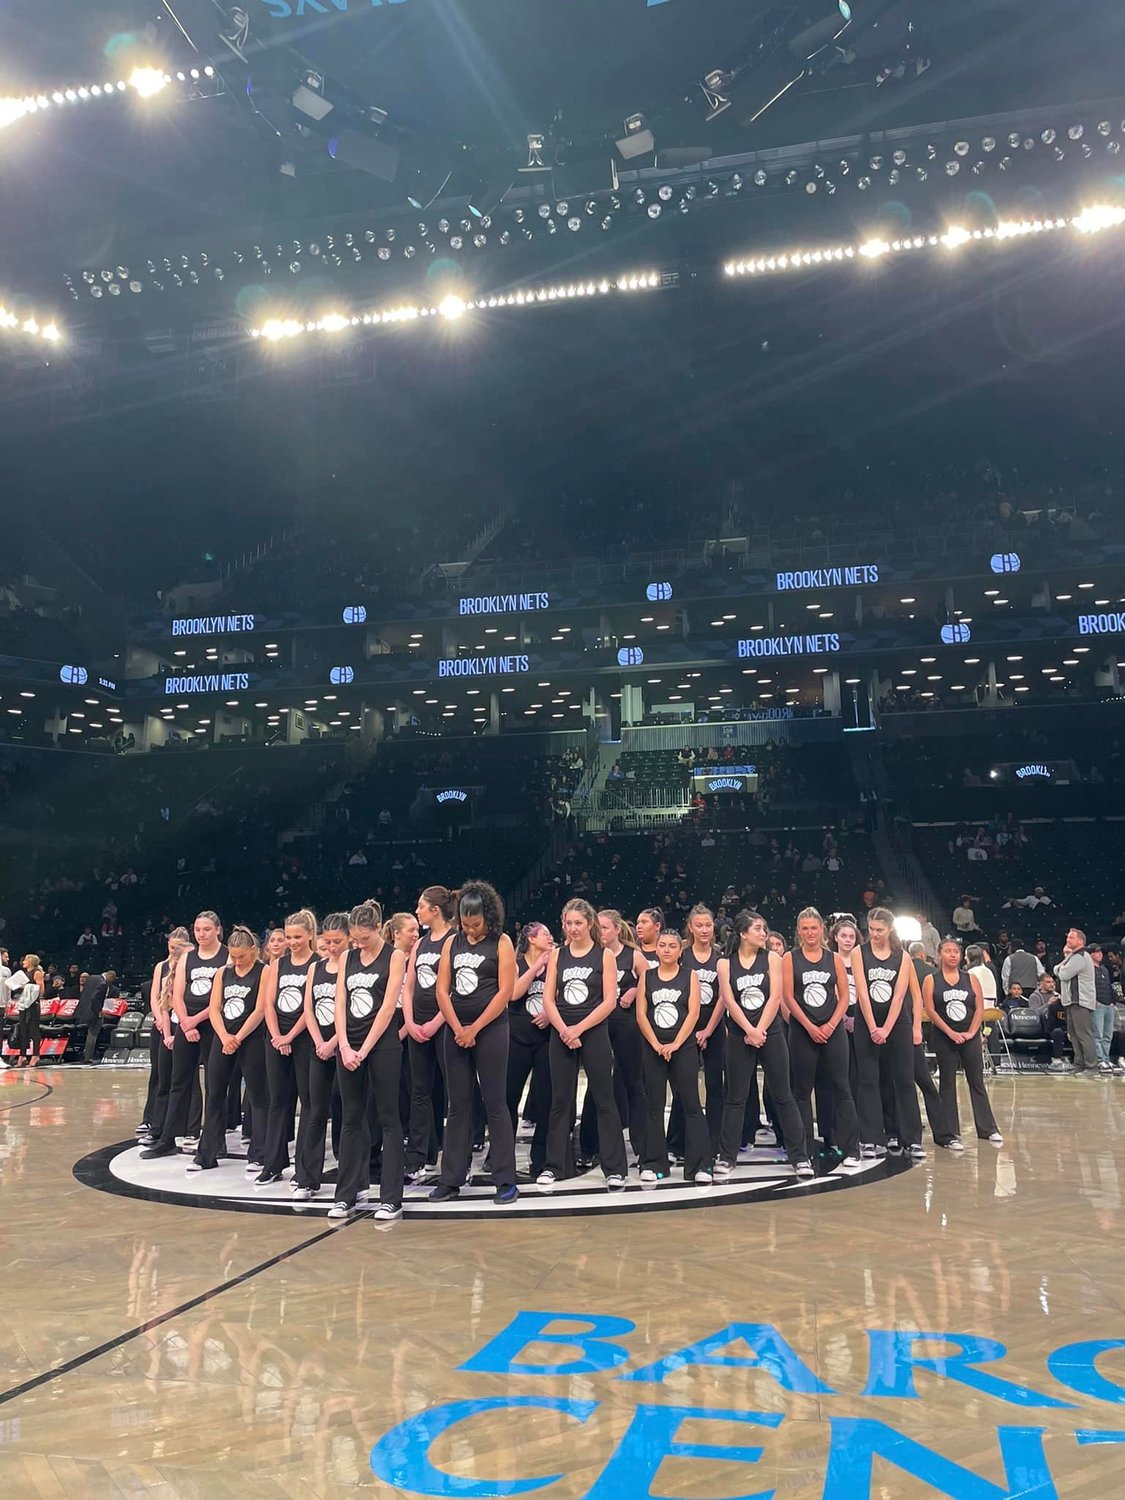 The Long Beach High School Hip Hop dancers performed before the Brooklyn Nets game against the Charlotte Hornets on March 5, taking center court.